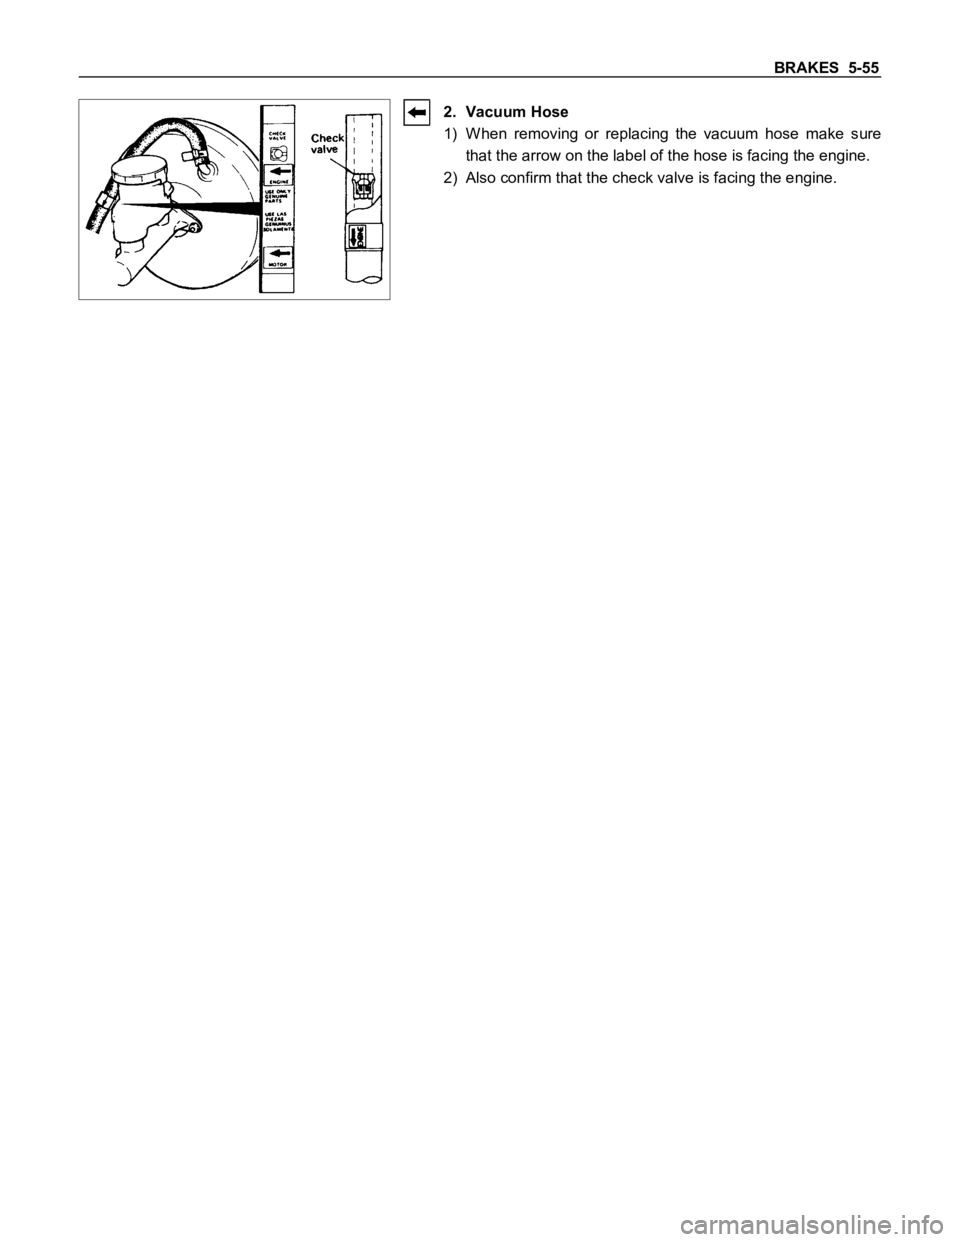 ISUZU TFS SERIES 1997  Workshop Manual BRAKES  5-55
2. Vacuum Hose
1) W hen  removing  or  replacing  the  vacuum  hose  make  sure
that the arrow on the label of the hose is facing the engine.
2) Also confirm that the check valve is facin